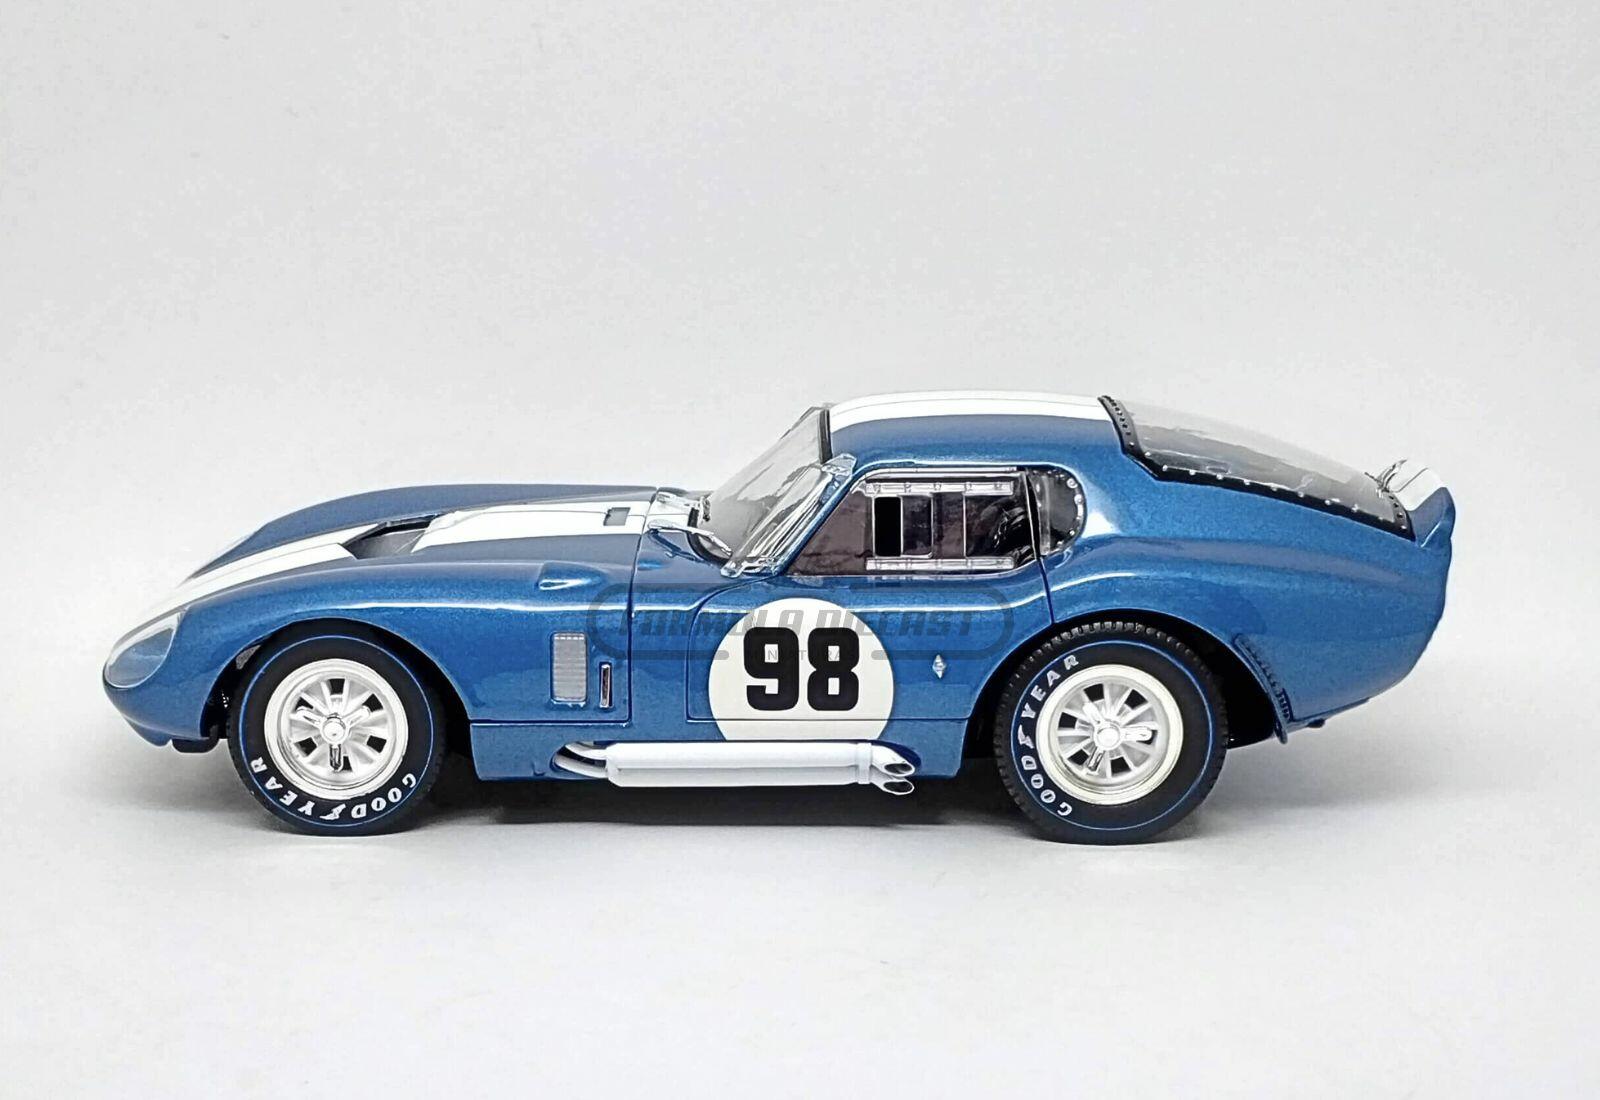 Shelby Collectibles 1 18 シェルビー コブラ デイトナ クーペ